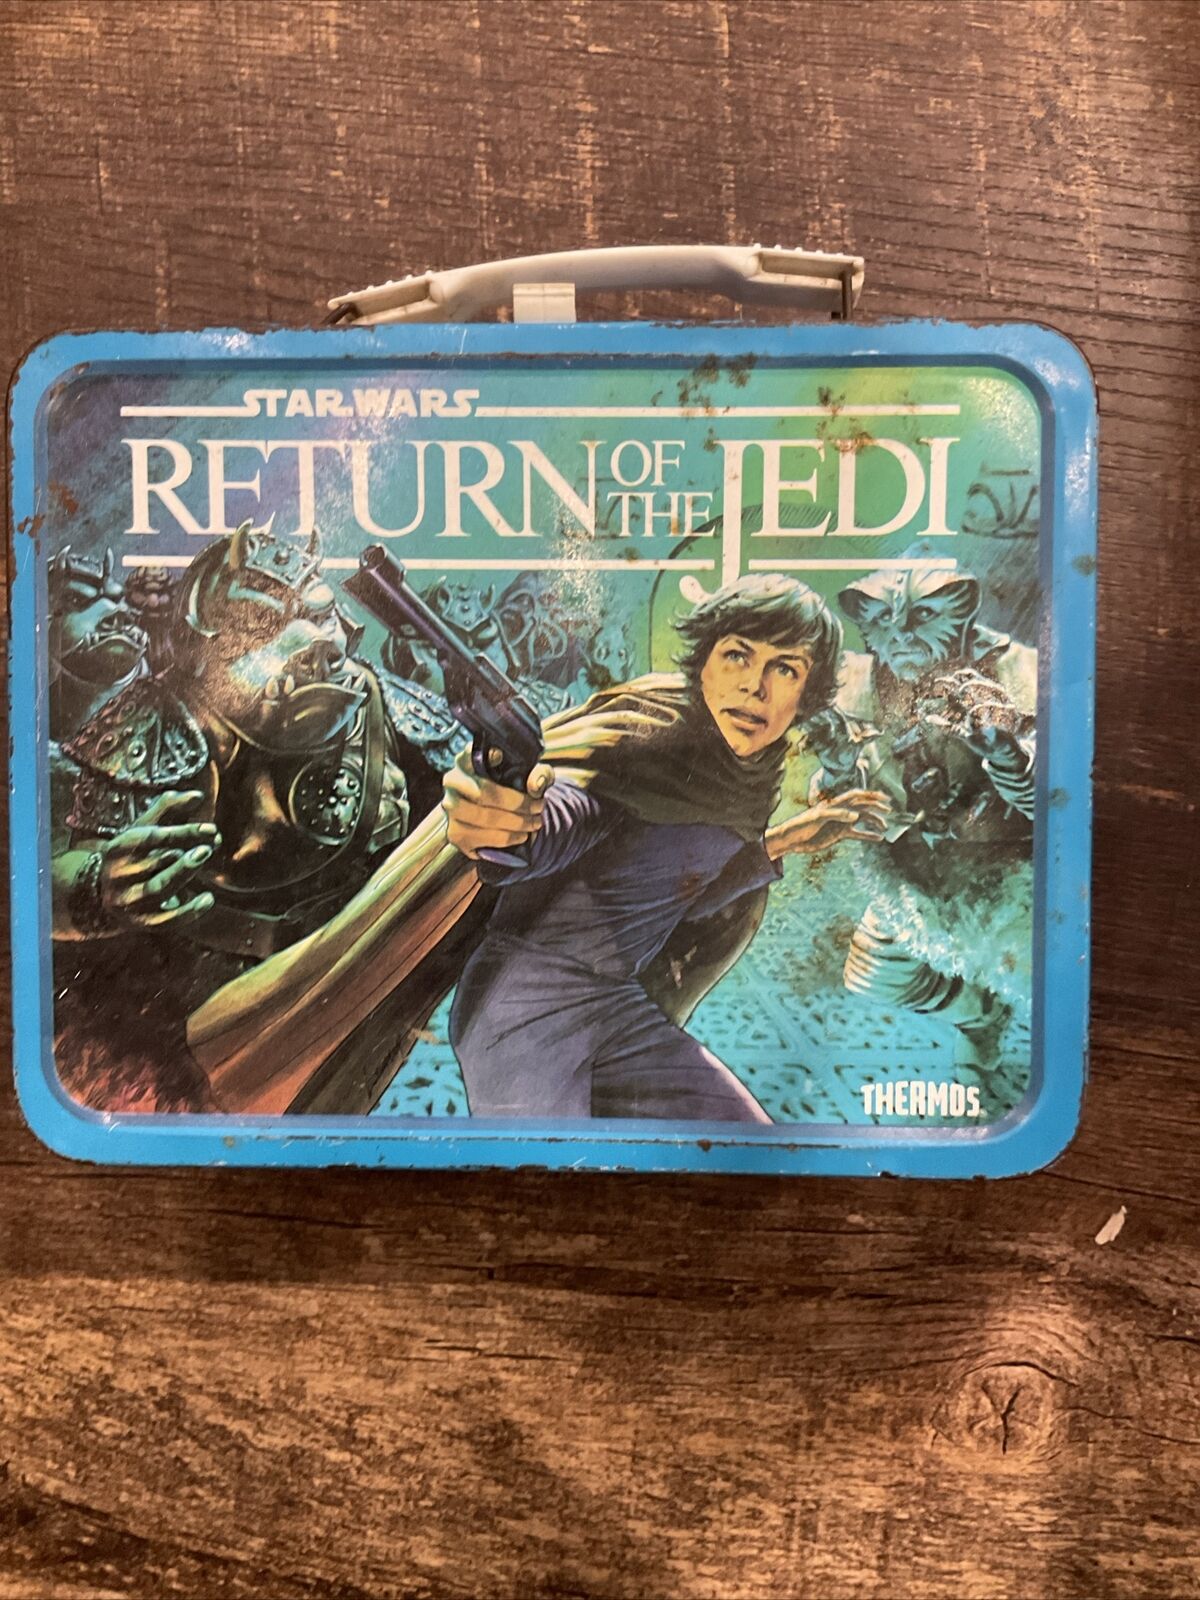 Star Wars Return of the Jedi  Thermos Metal Lunch Box  1983 Thermos NOT included